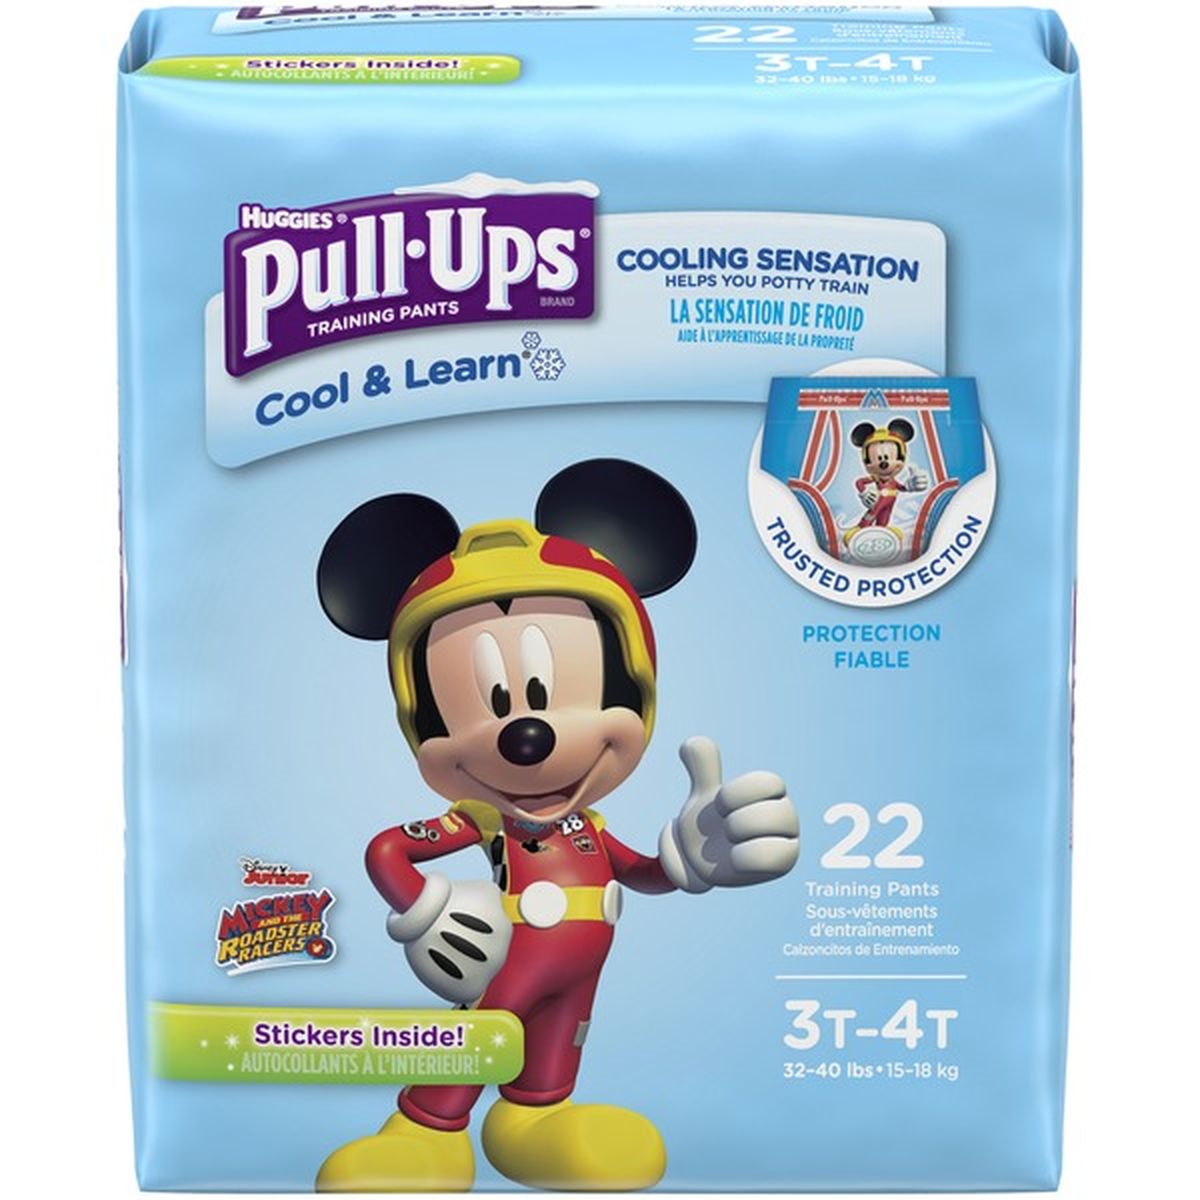 Pull-Ups Cool & Learn Potty Training Pants for Boys, 3T-4T (32-40 lb.), 22  CT (Packaging May Vary) (22 ct) Delivery or Pickup Near Me - Instacart